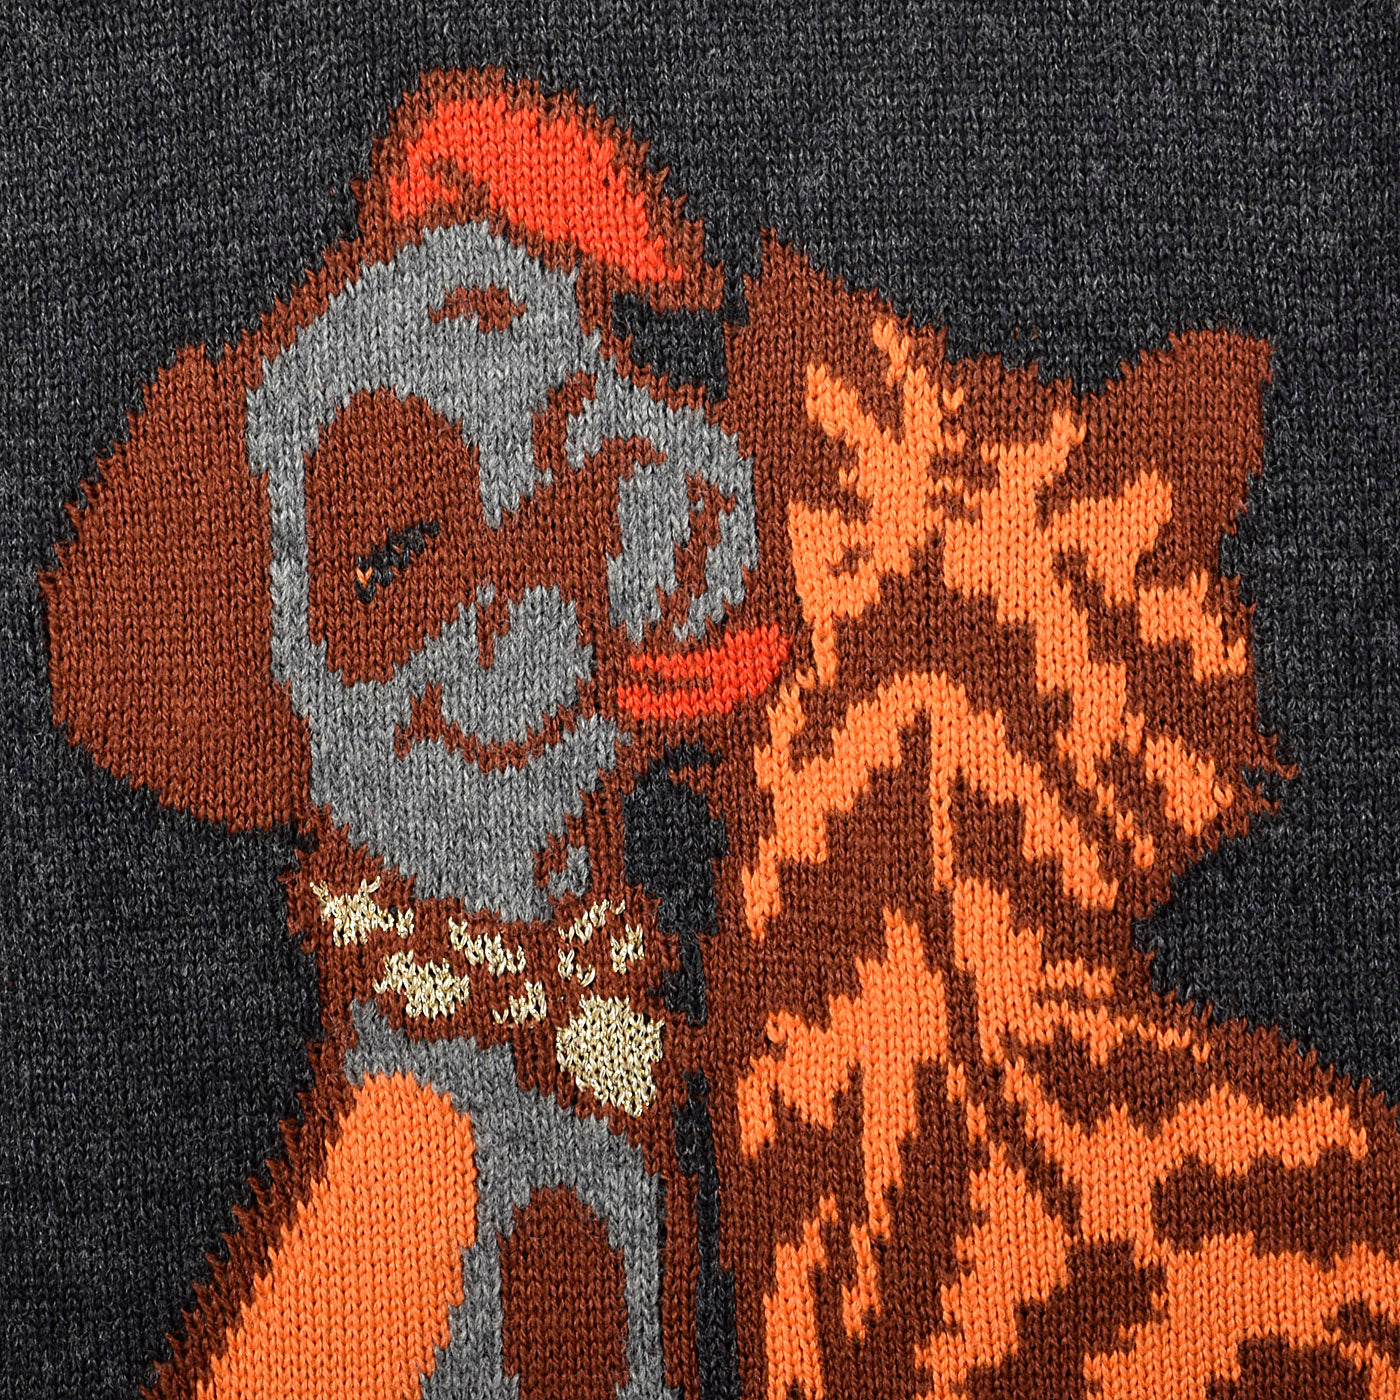 1980s Escada Novelty Dog and Cat Friends Sweater